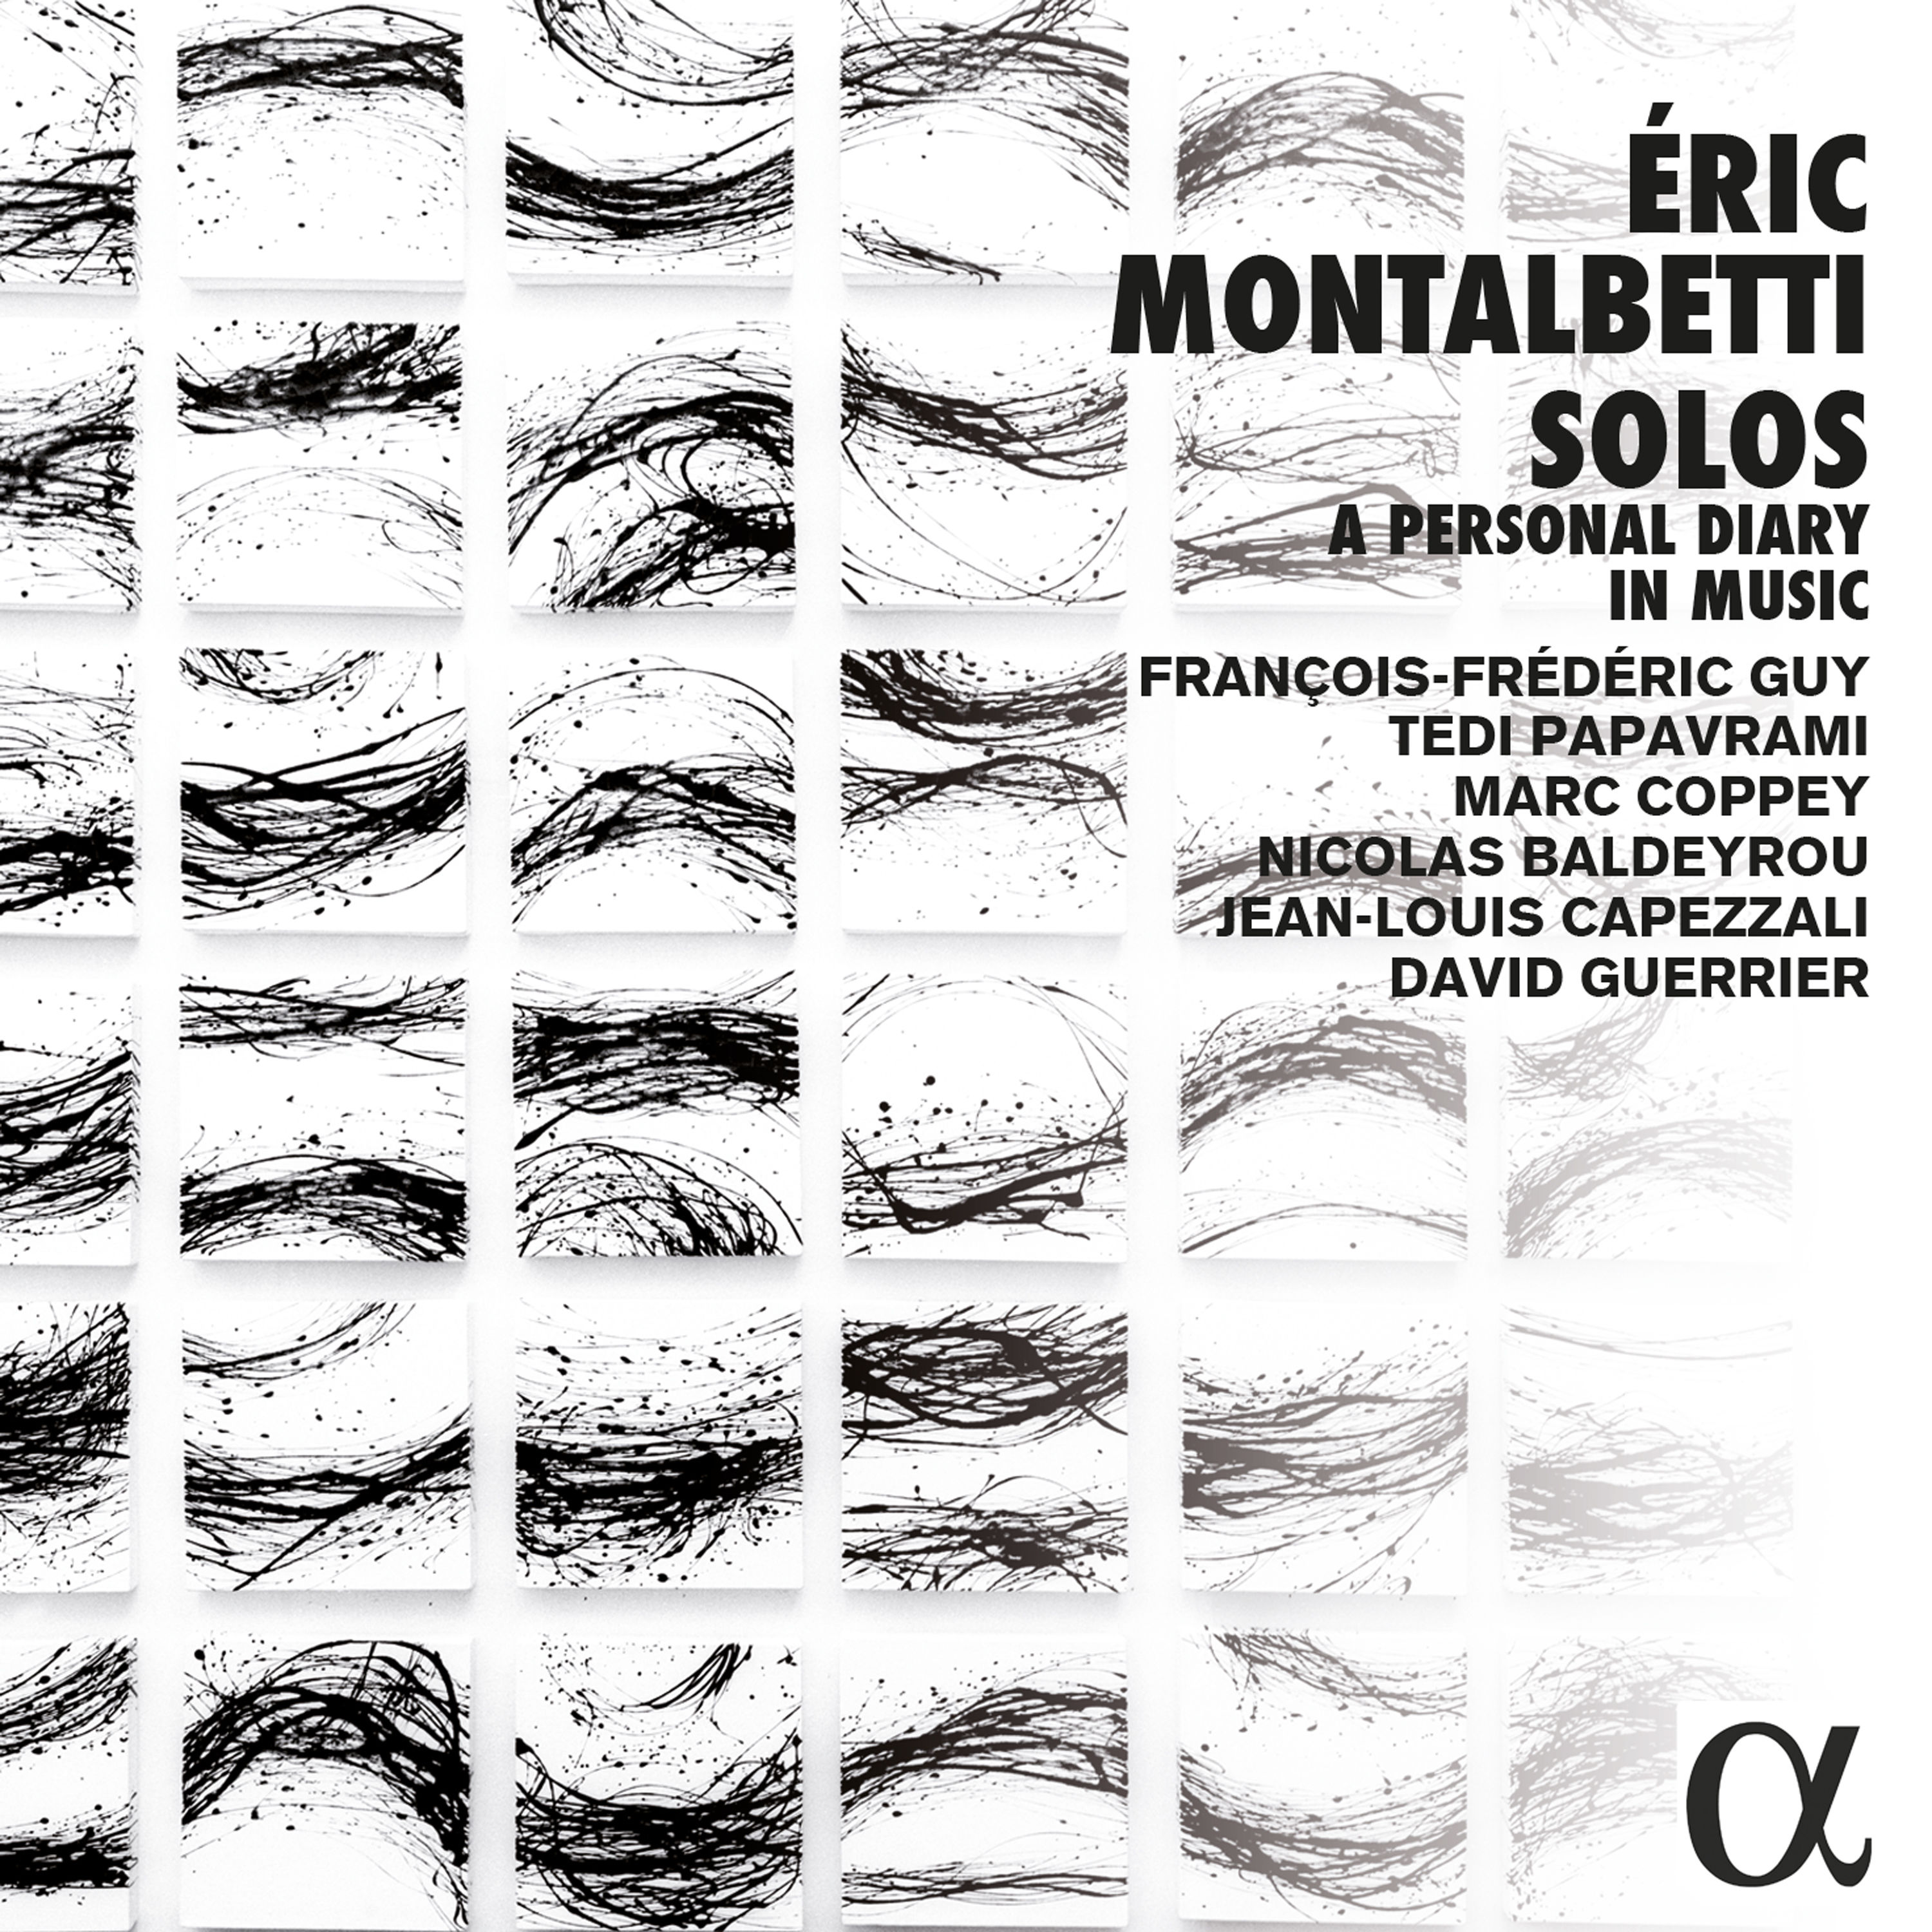 Francois-Frederic Guy – Montalbetti: Solos, a Personal Diary in Music (2016) [FLAC 24bit/48kHz]